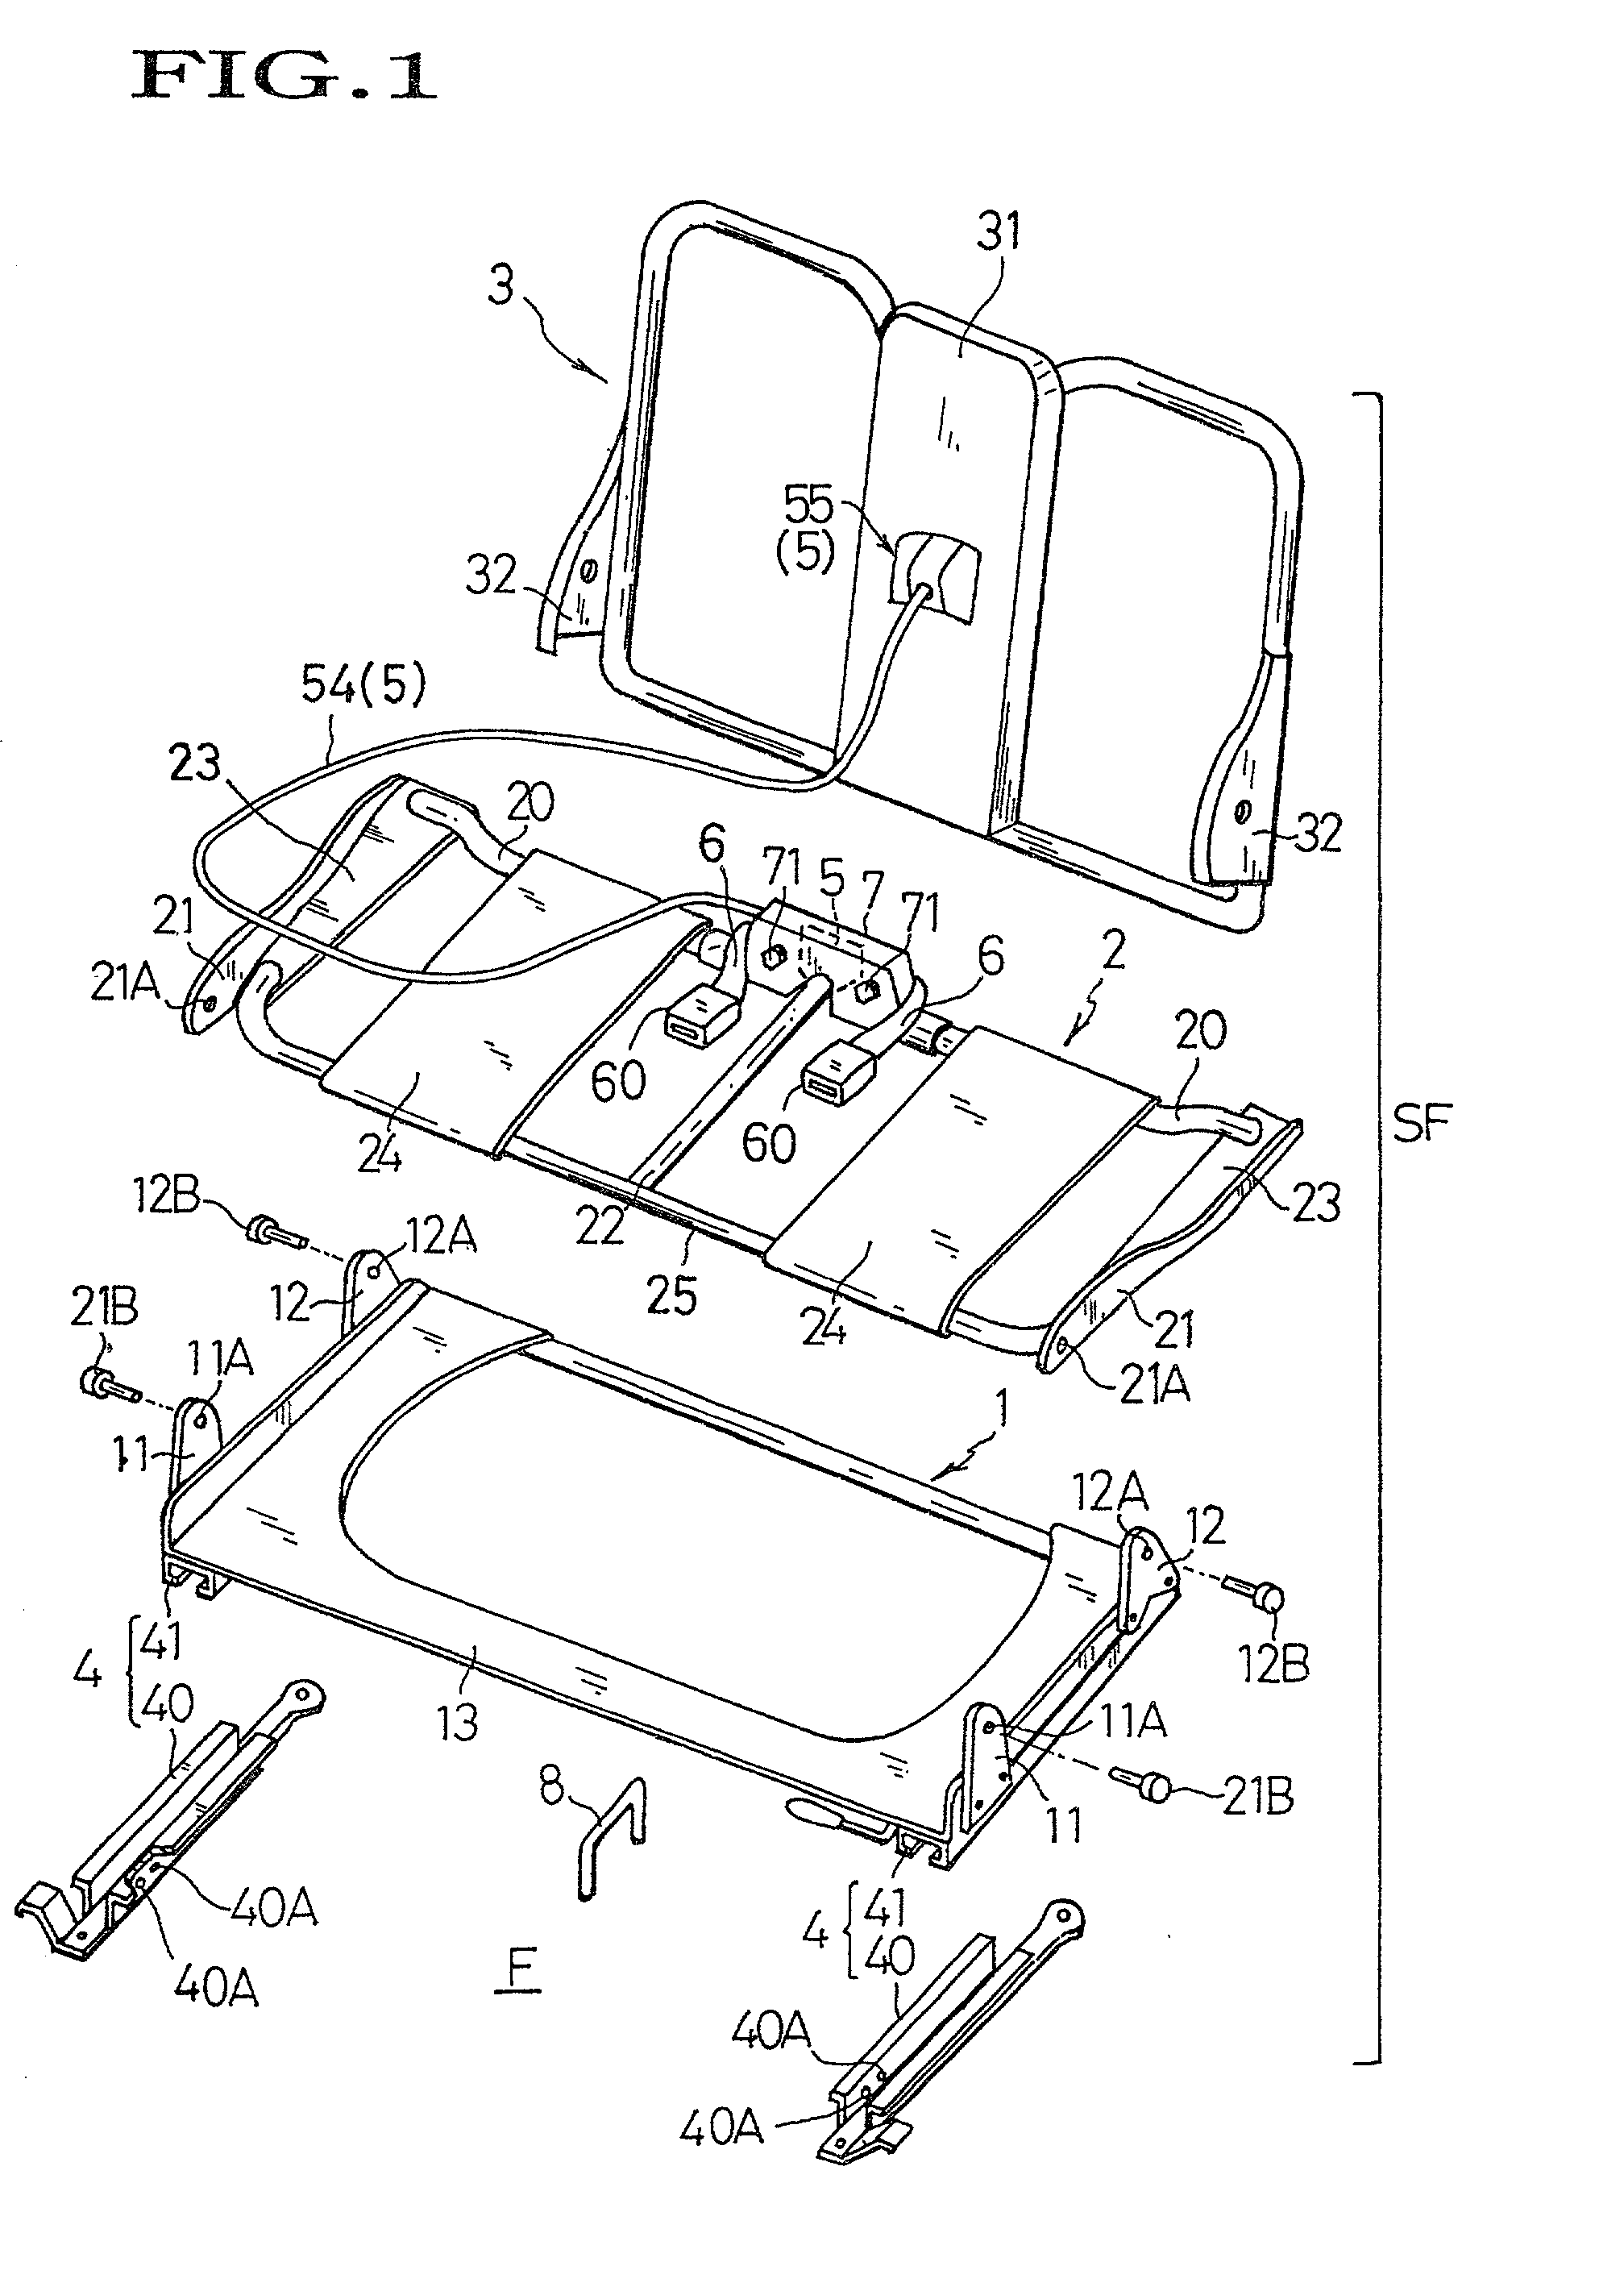 Structure of seat for vehicle